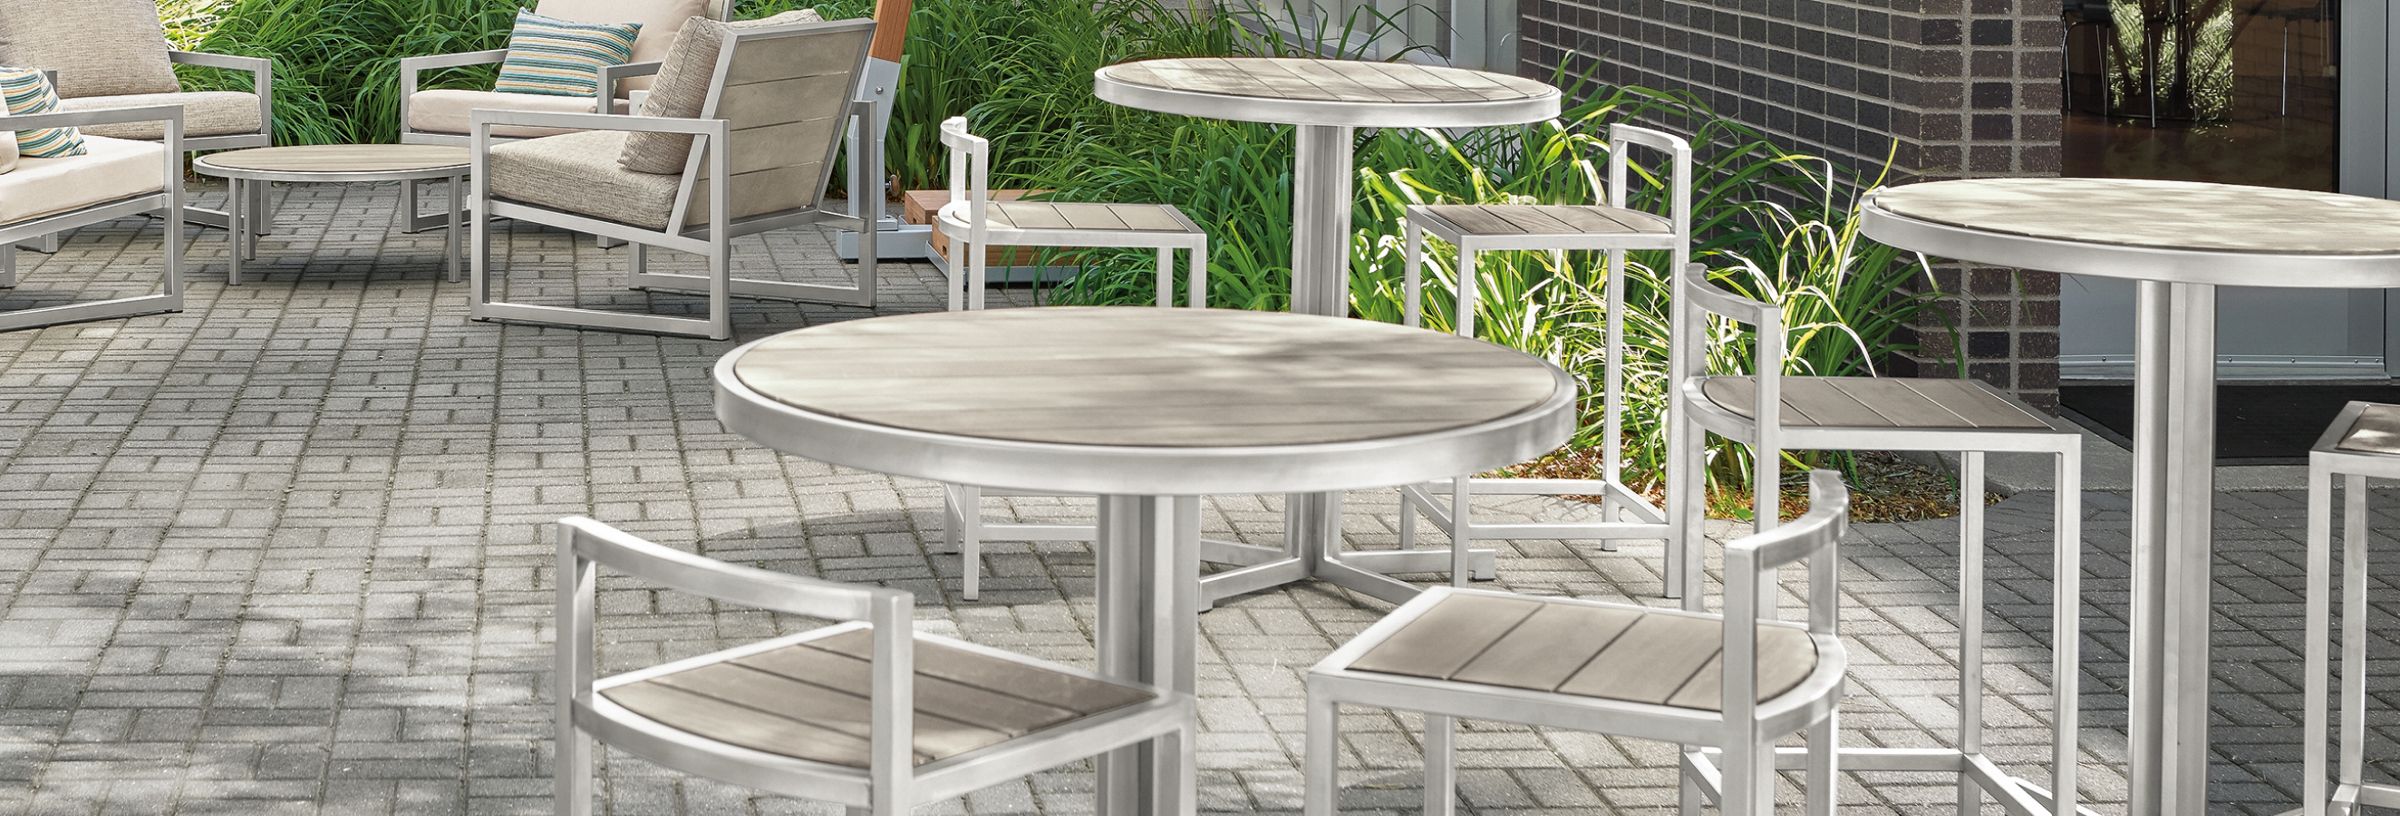 Commercial Outdoor Dining & Kitchen Furniture